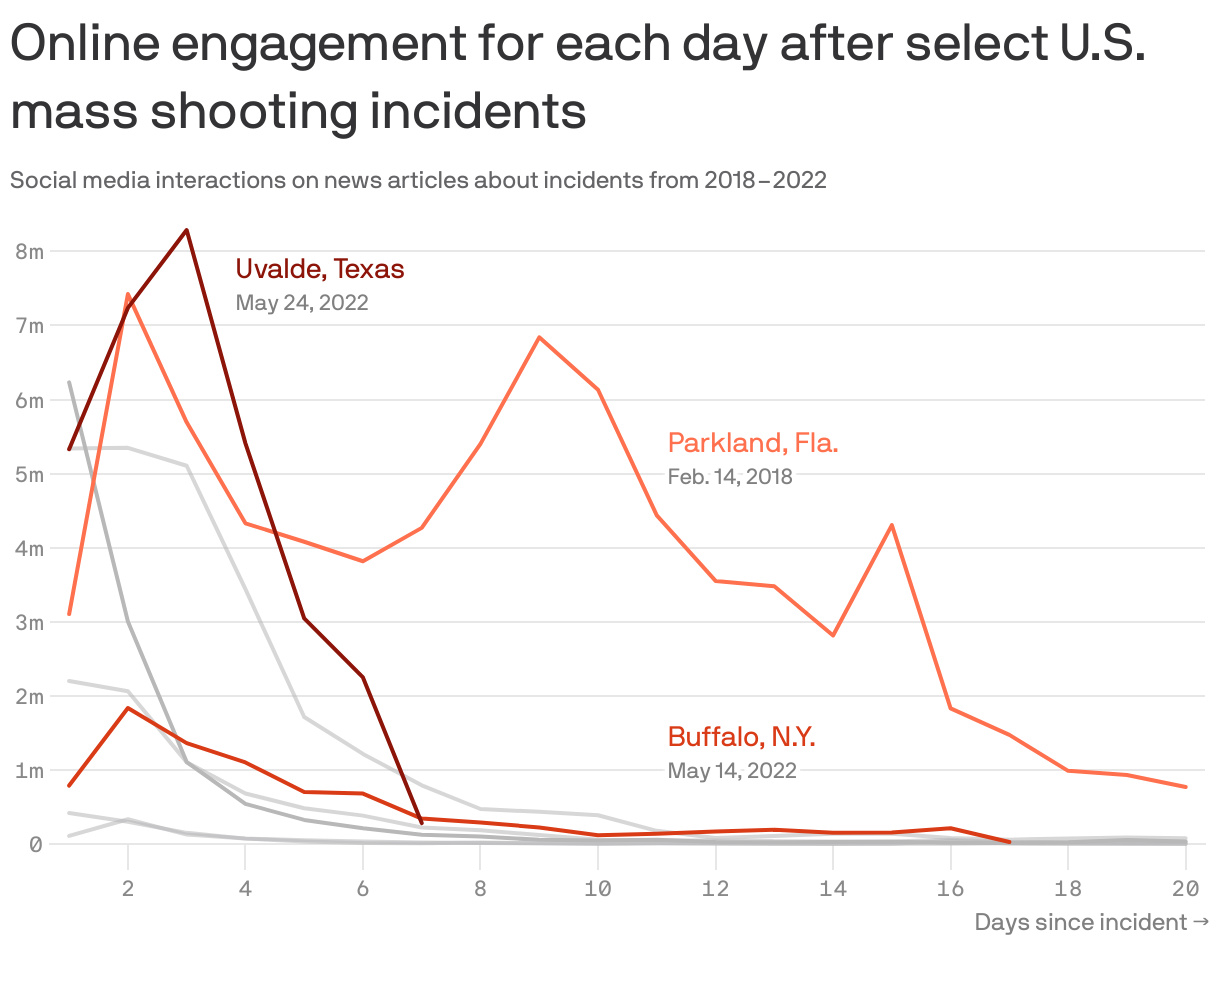 Online engagement for each day after select U.S. mass shooting incidents